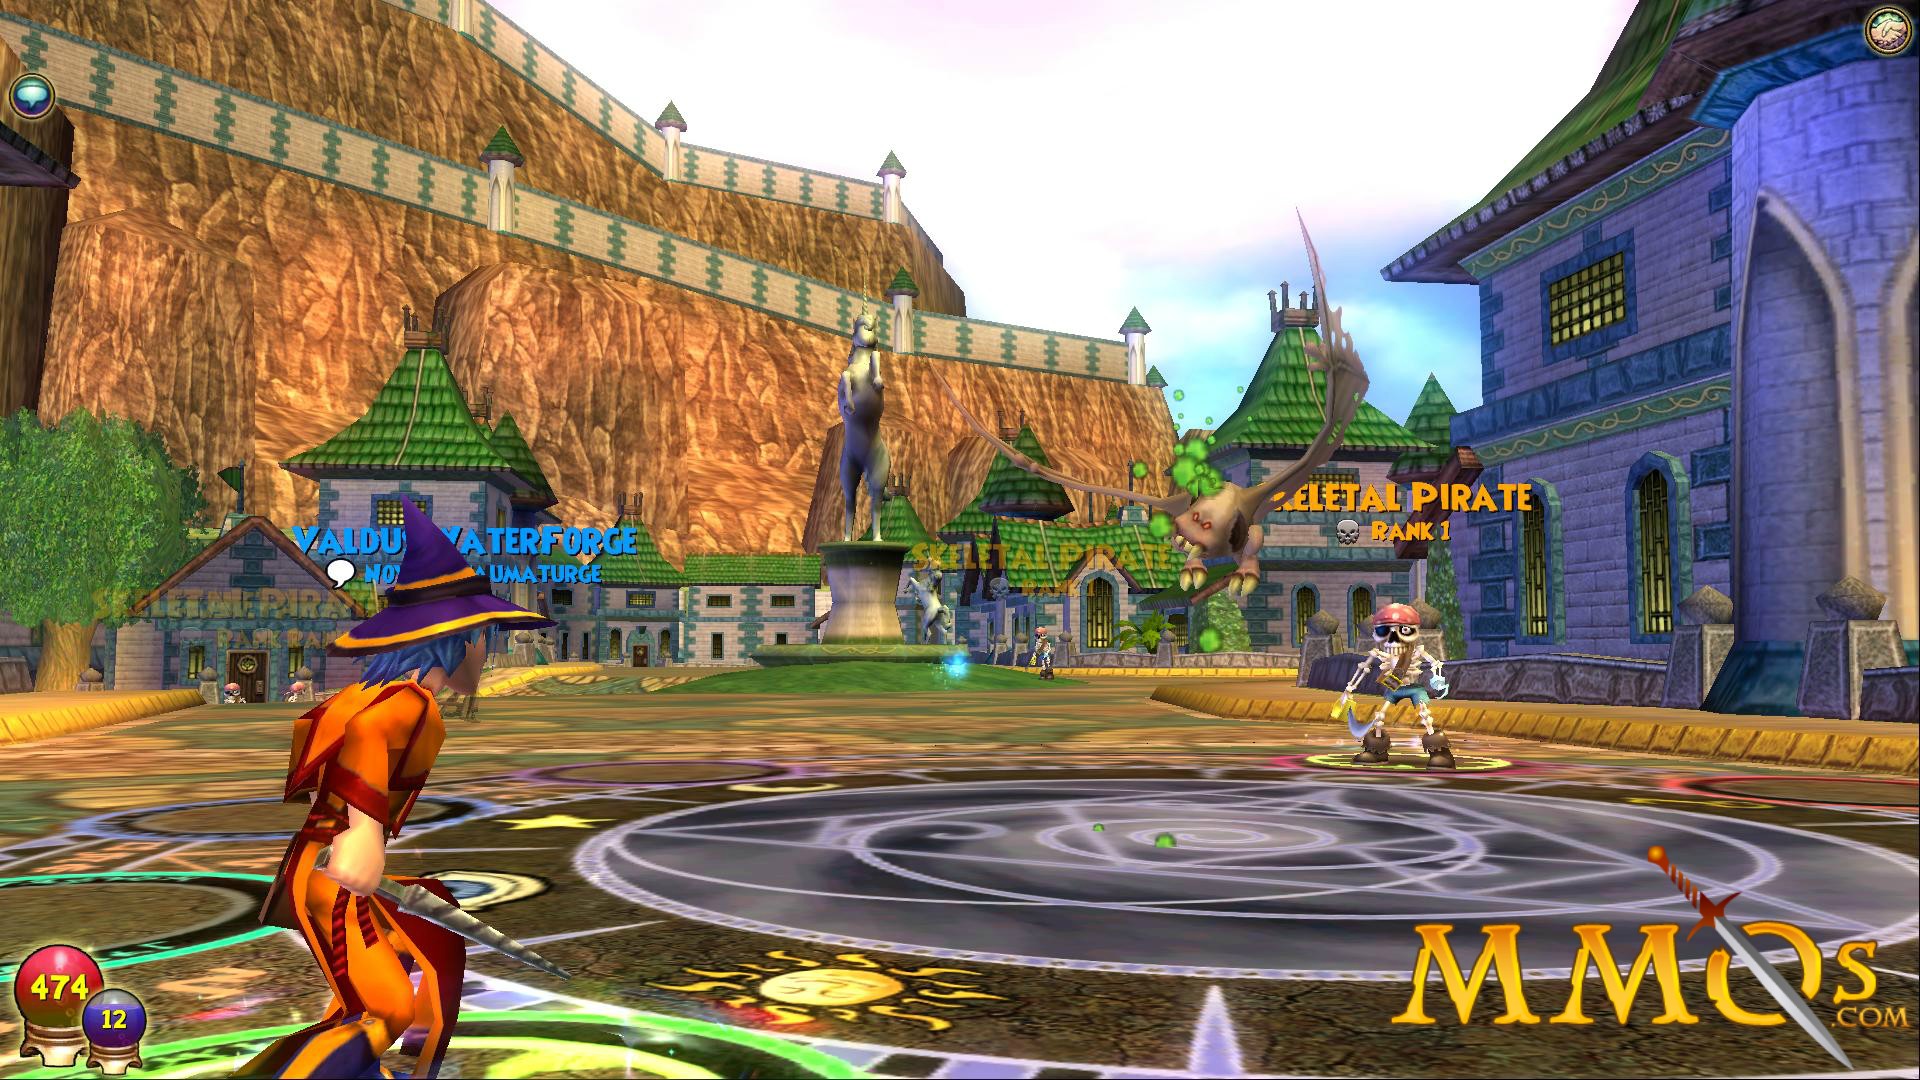 Wizard101 Game Review 